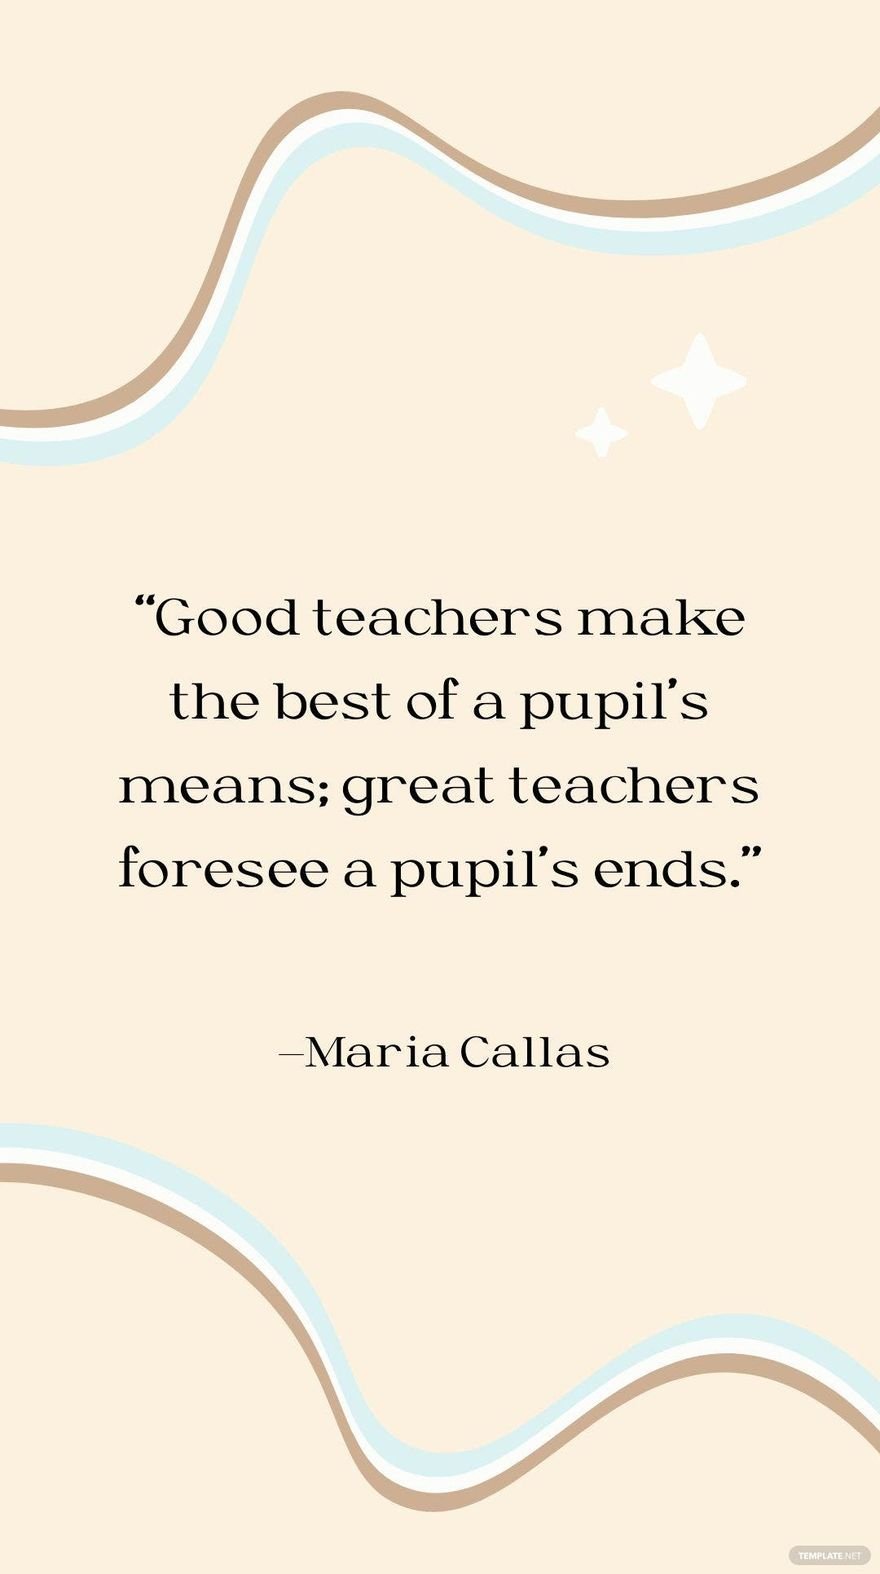 Free Maria Callas - Good teachers make the best of a pupil’s means; great teachers foresee a pupil’s ends.